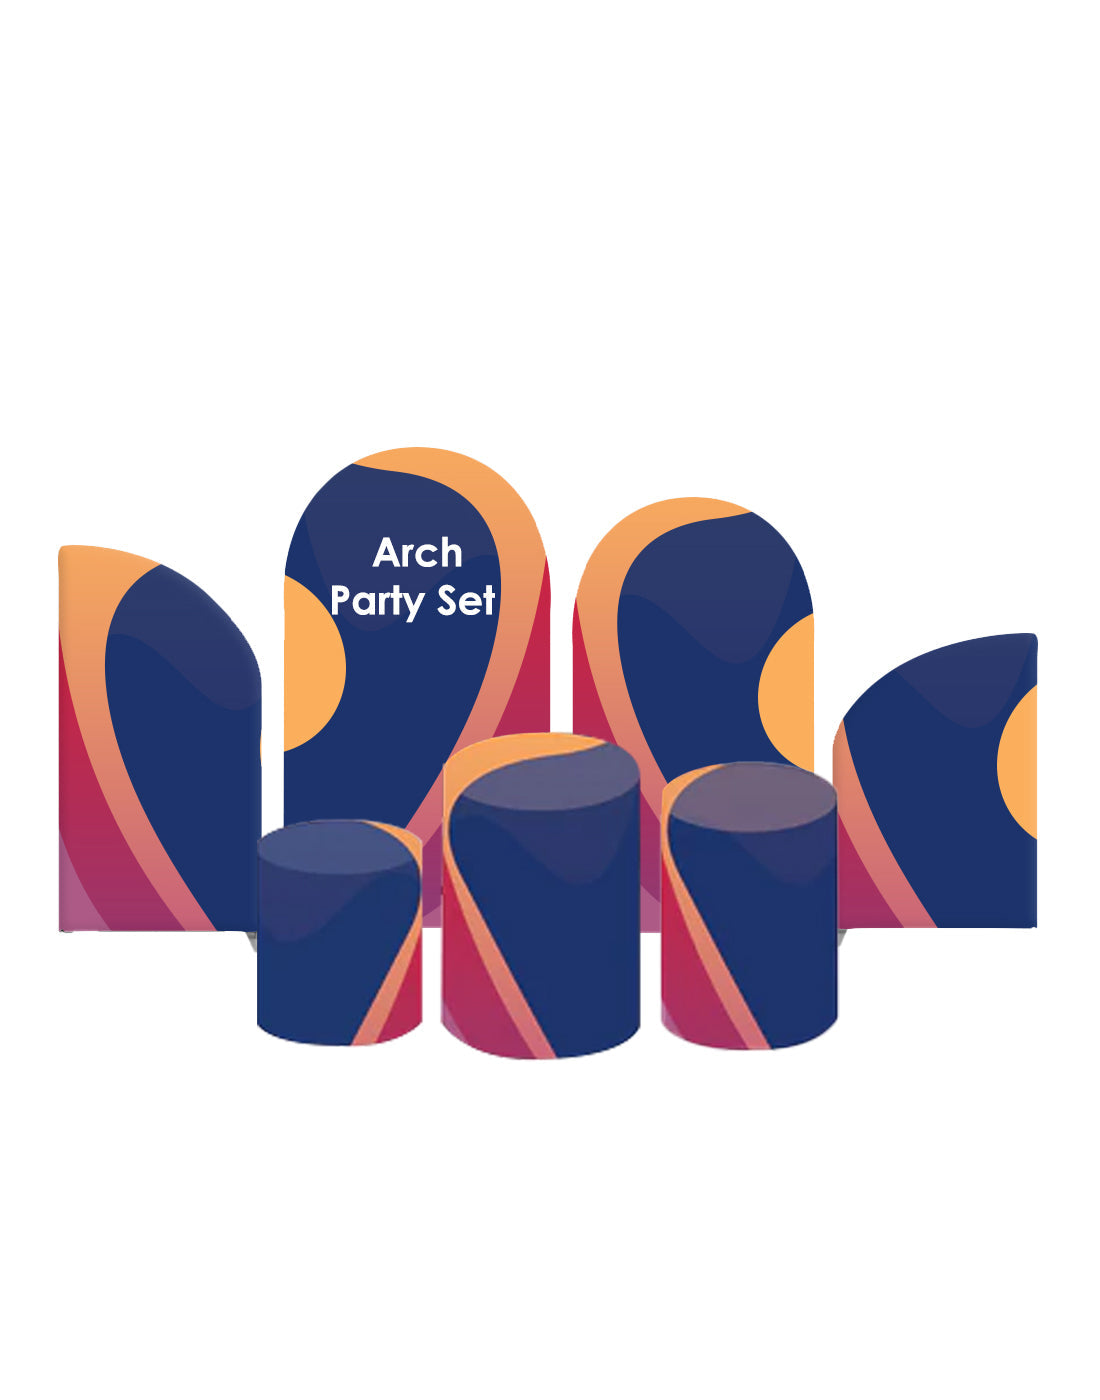 Arch Party Sets - 4 walls with base